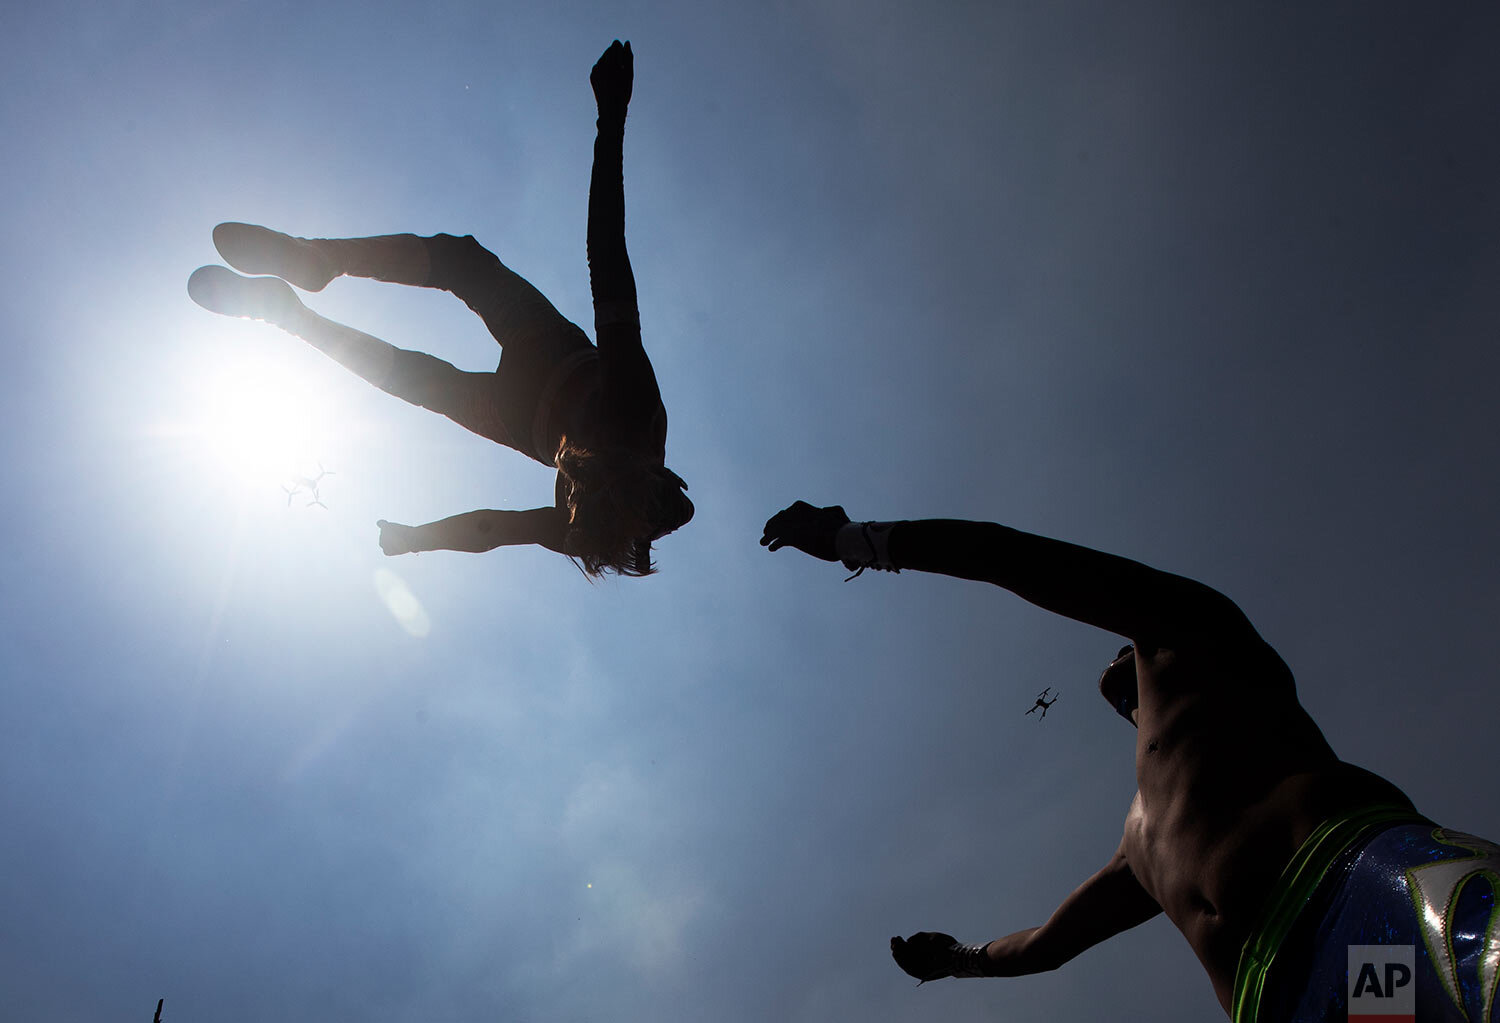  Lucha Libre wrestlers "El Sol," or The Sun, flies over "Gran Felipe Jr." or The Great Felipe Jr., during an exhibition fight for the media as they train for what will be live streaming events which they charge for, at Xochimilco's floating gardens o